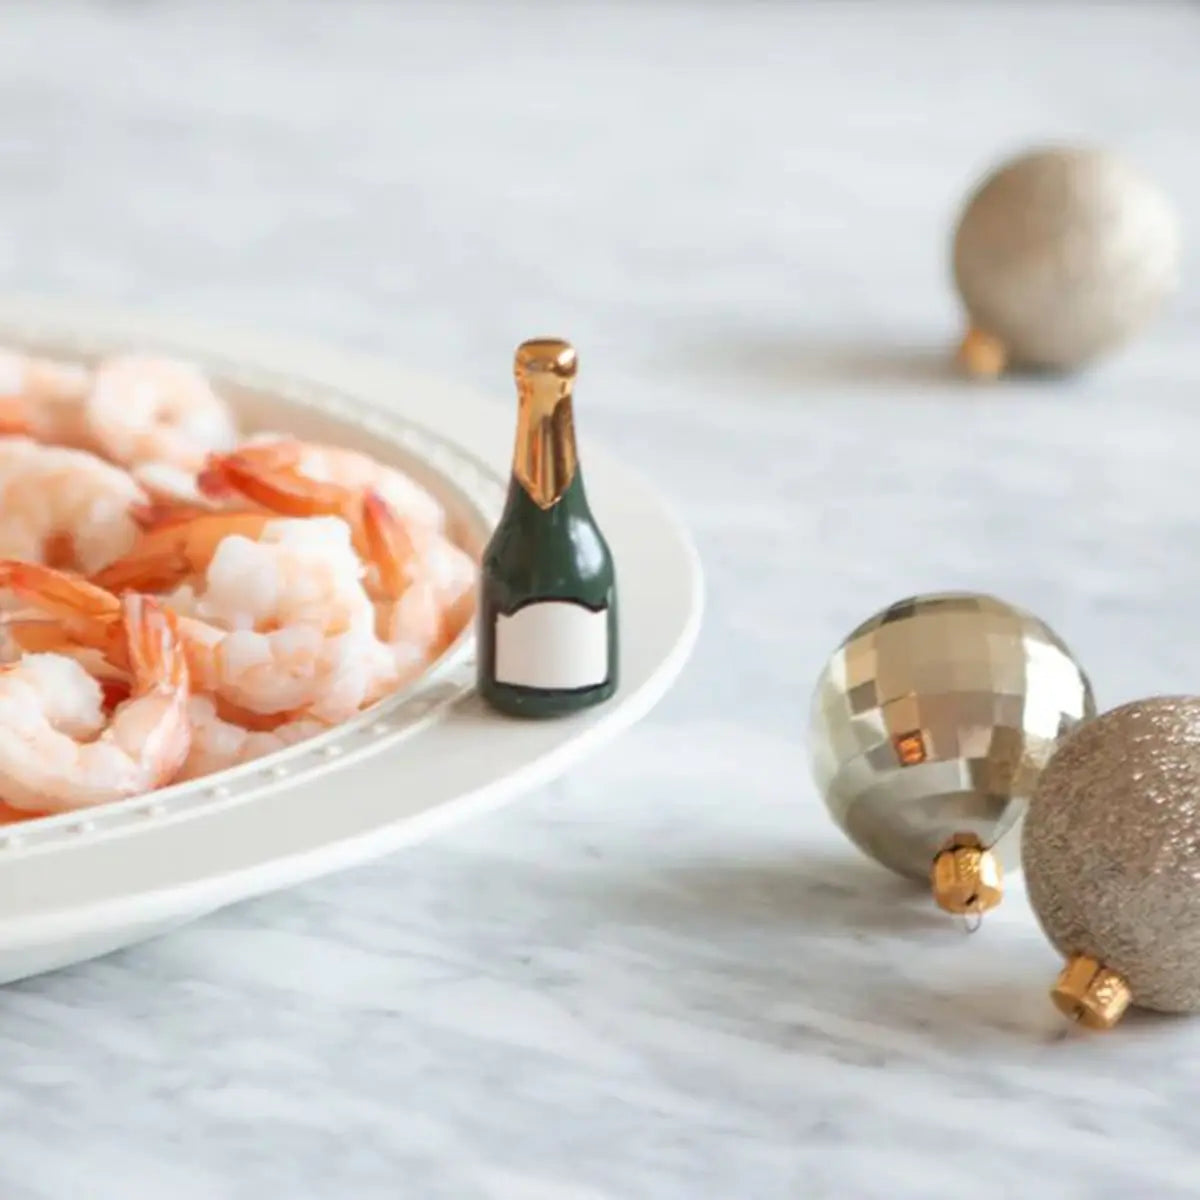 Nora Fleming Champagne Celebration Champagne Bottle Mini on a plate with cocktail shrimp with champagne colored ornaments laid on the table